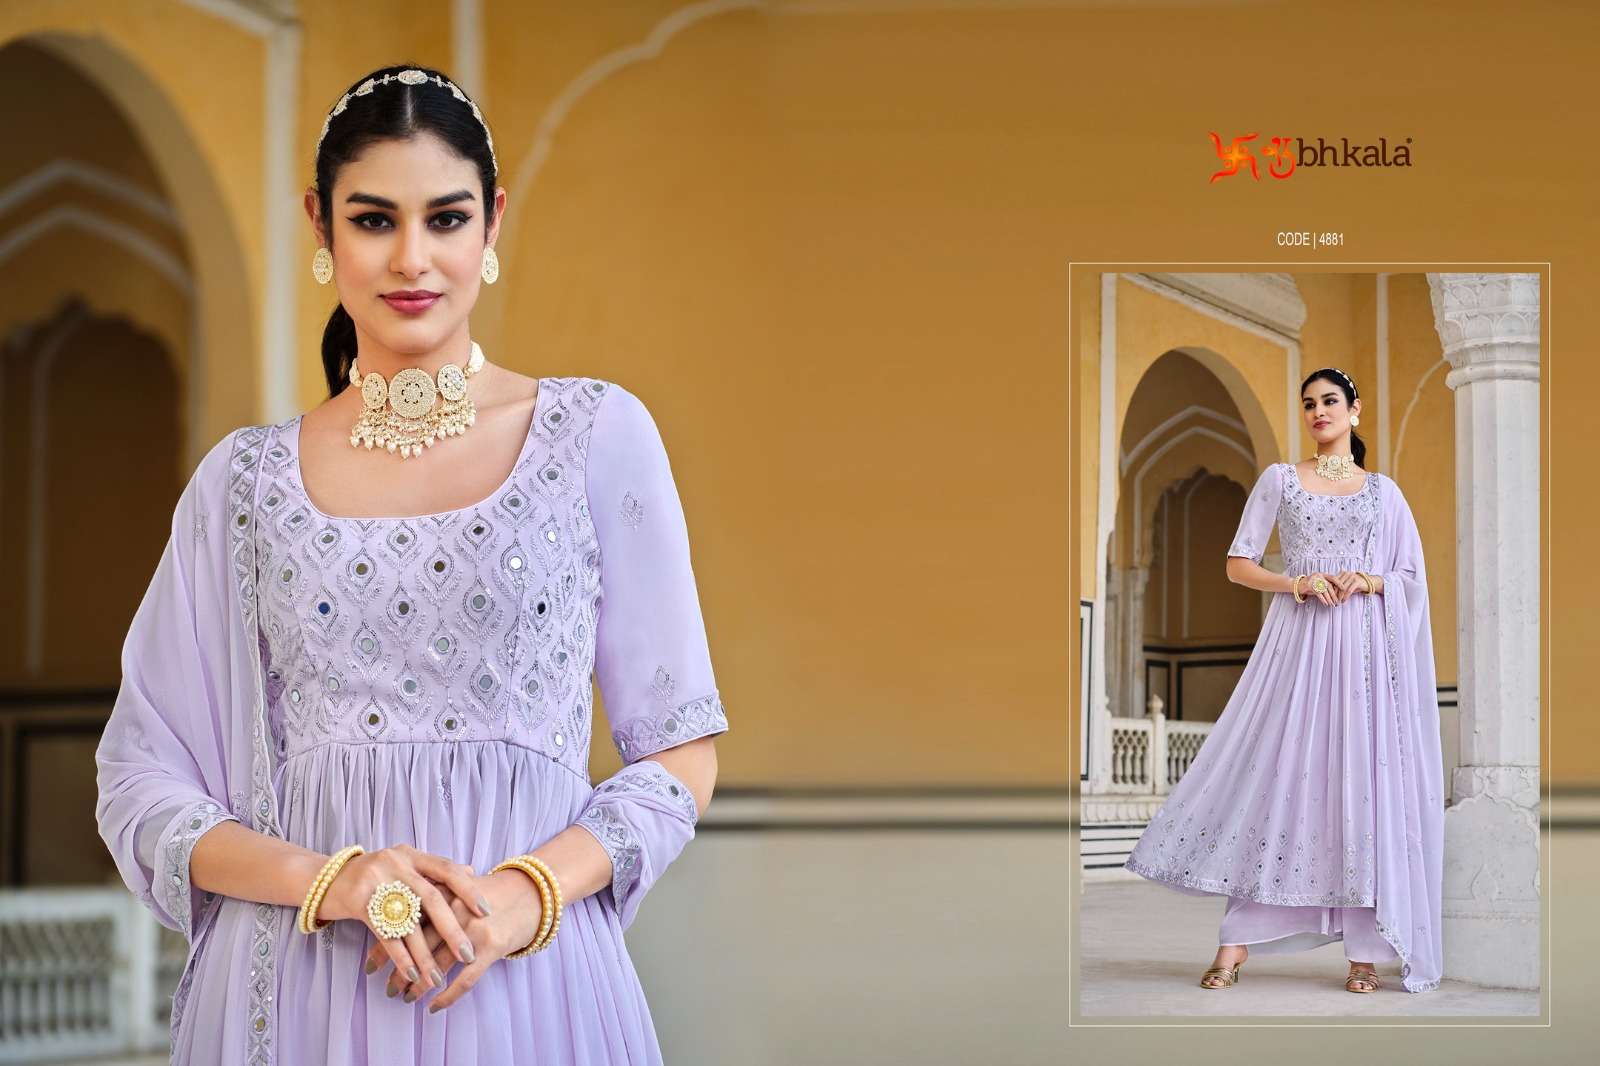 FLORY VOL. 32 Embroidered Stitched New Style Salwar Suit Wholesale catalog